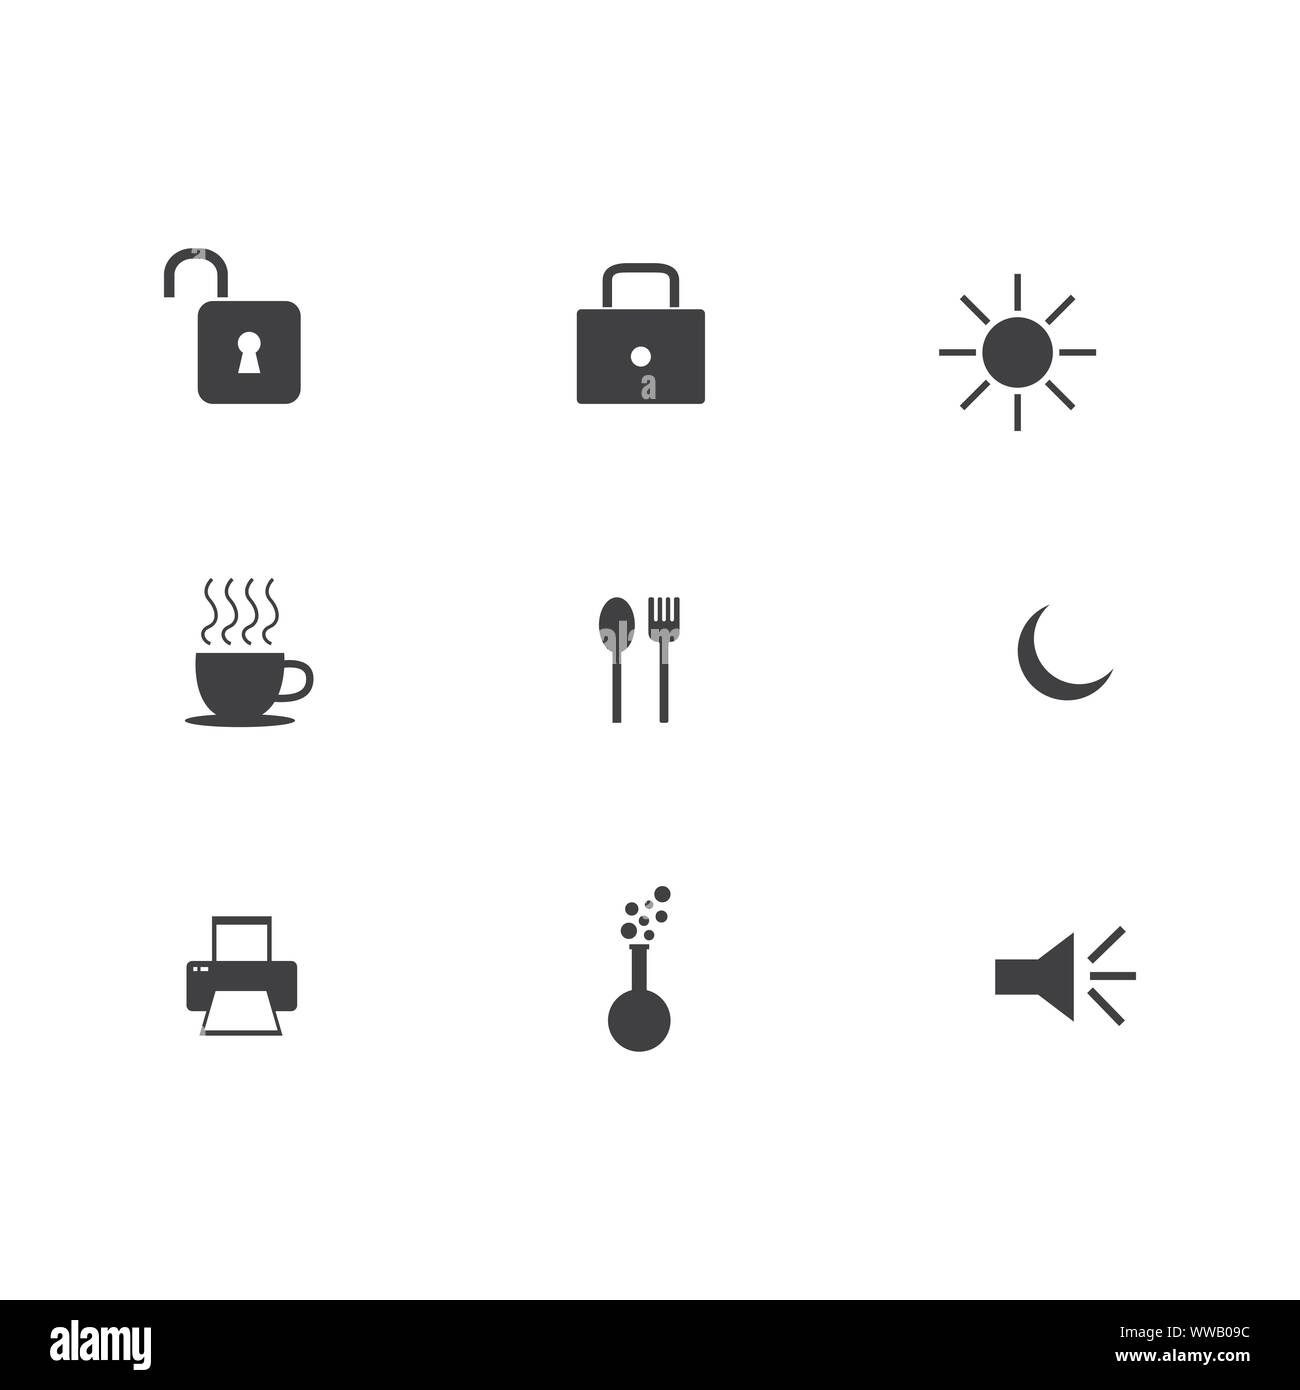 website element icons for web design. Modern website elements icon set. Vector file in layers for easy editing Stock Vector